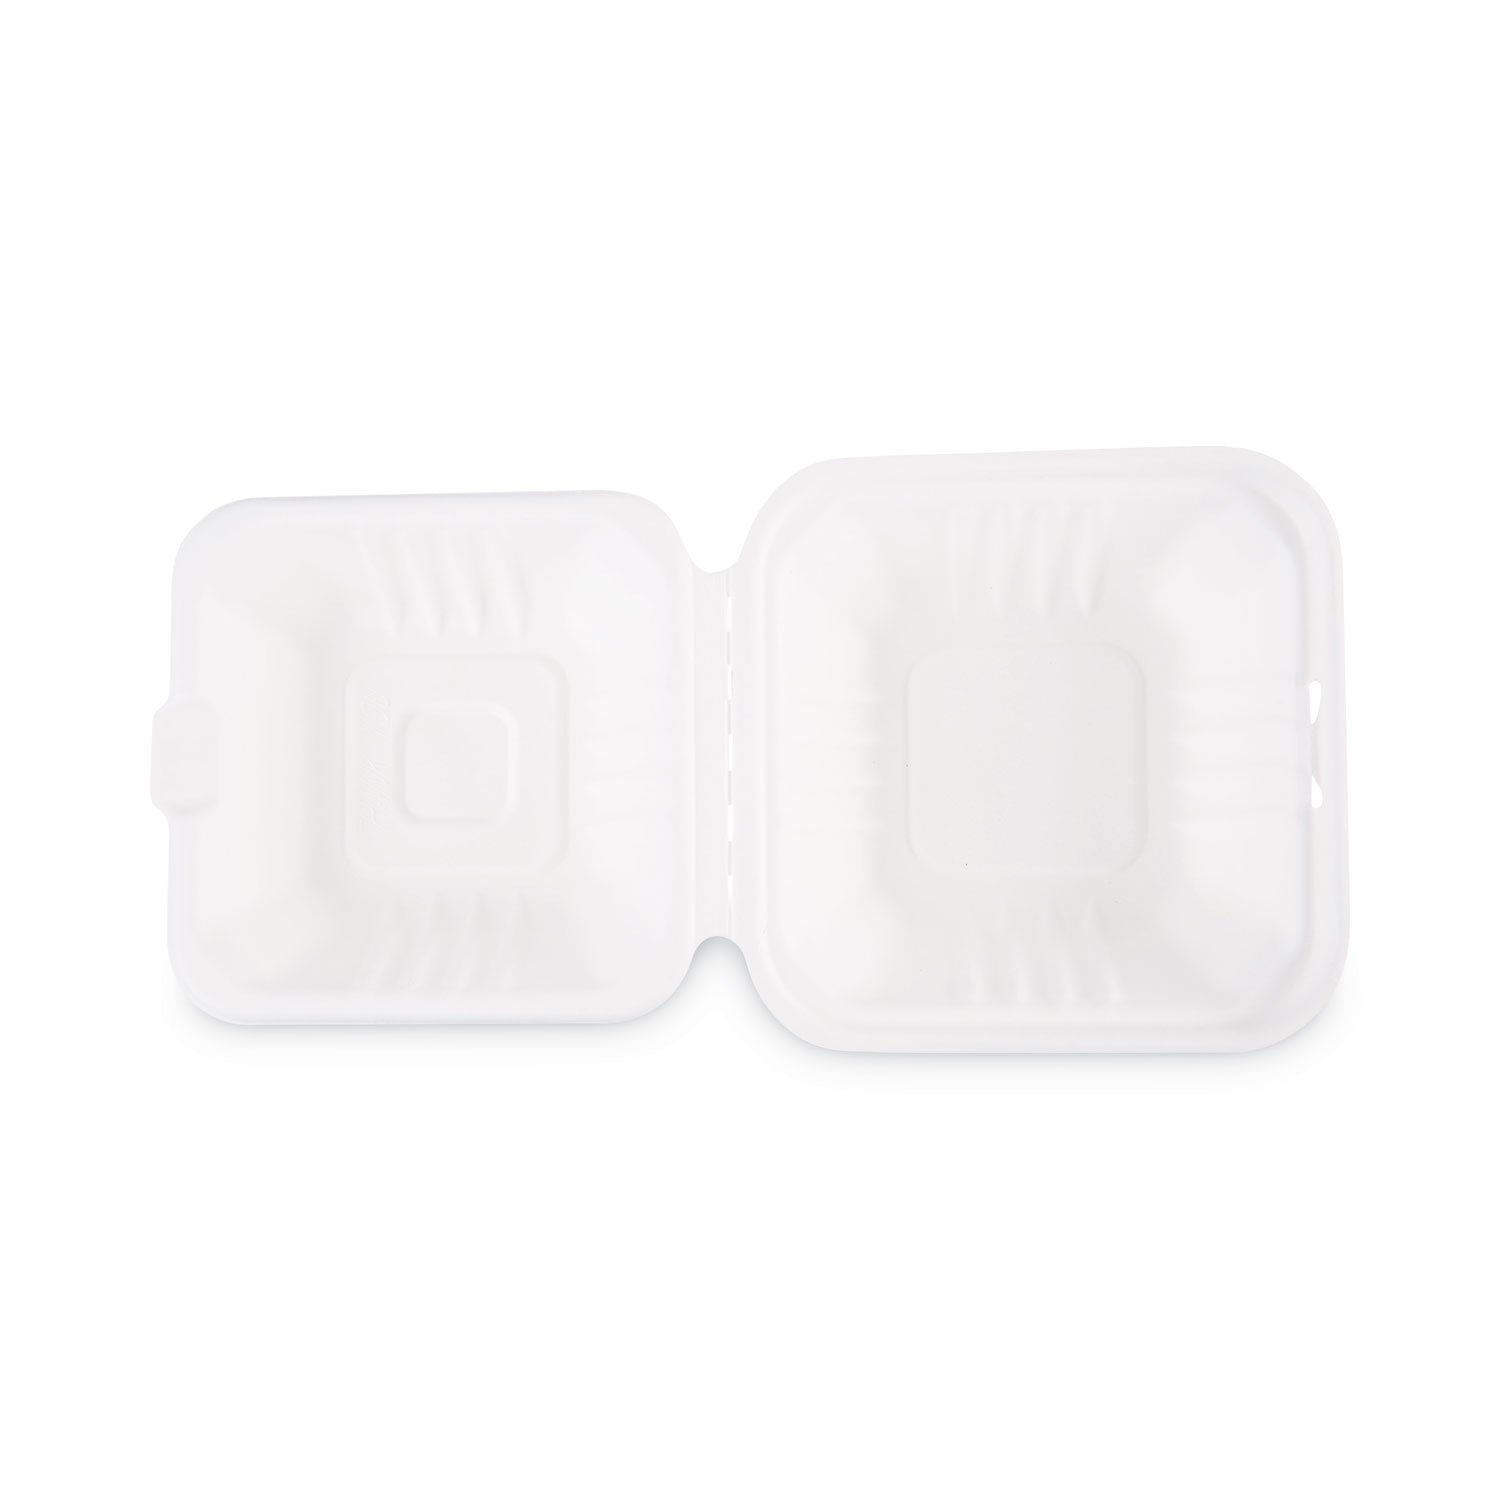 bagasse-food-containers-hinged-lid-1-compartment-6-x-6-x-319-white-sugarcane-125-sleeve-4-sleeves-carton_bwkhingewf1cm6 - 7